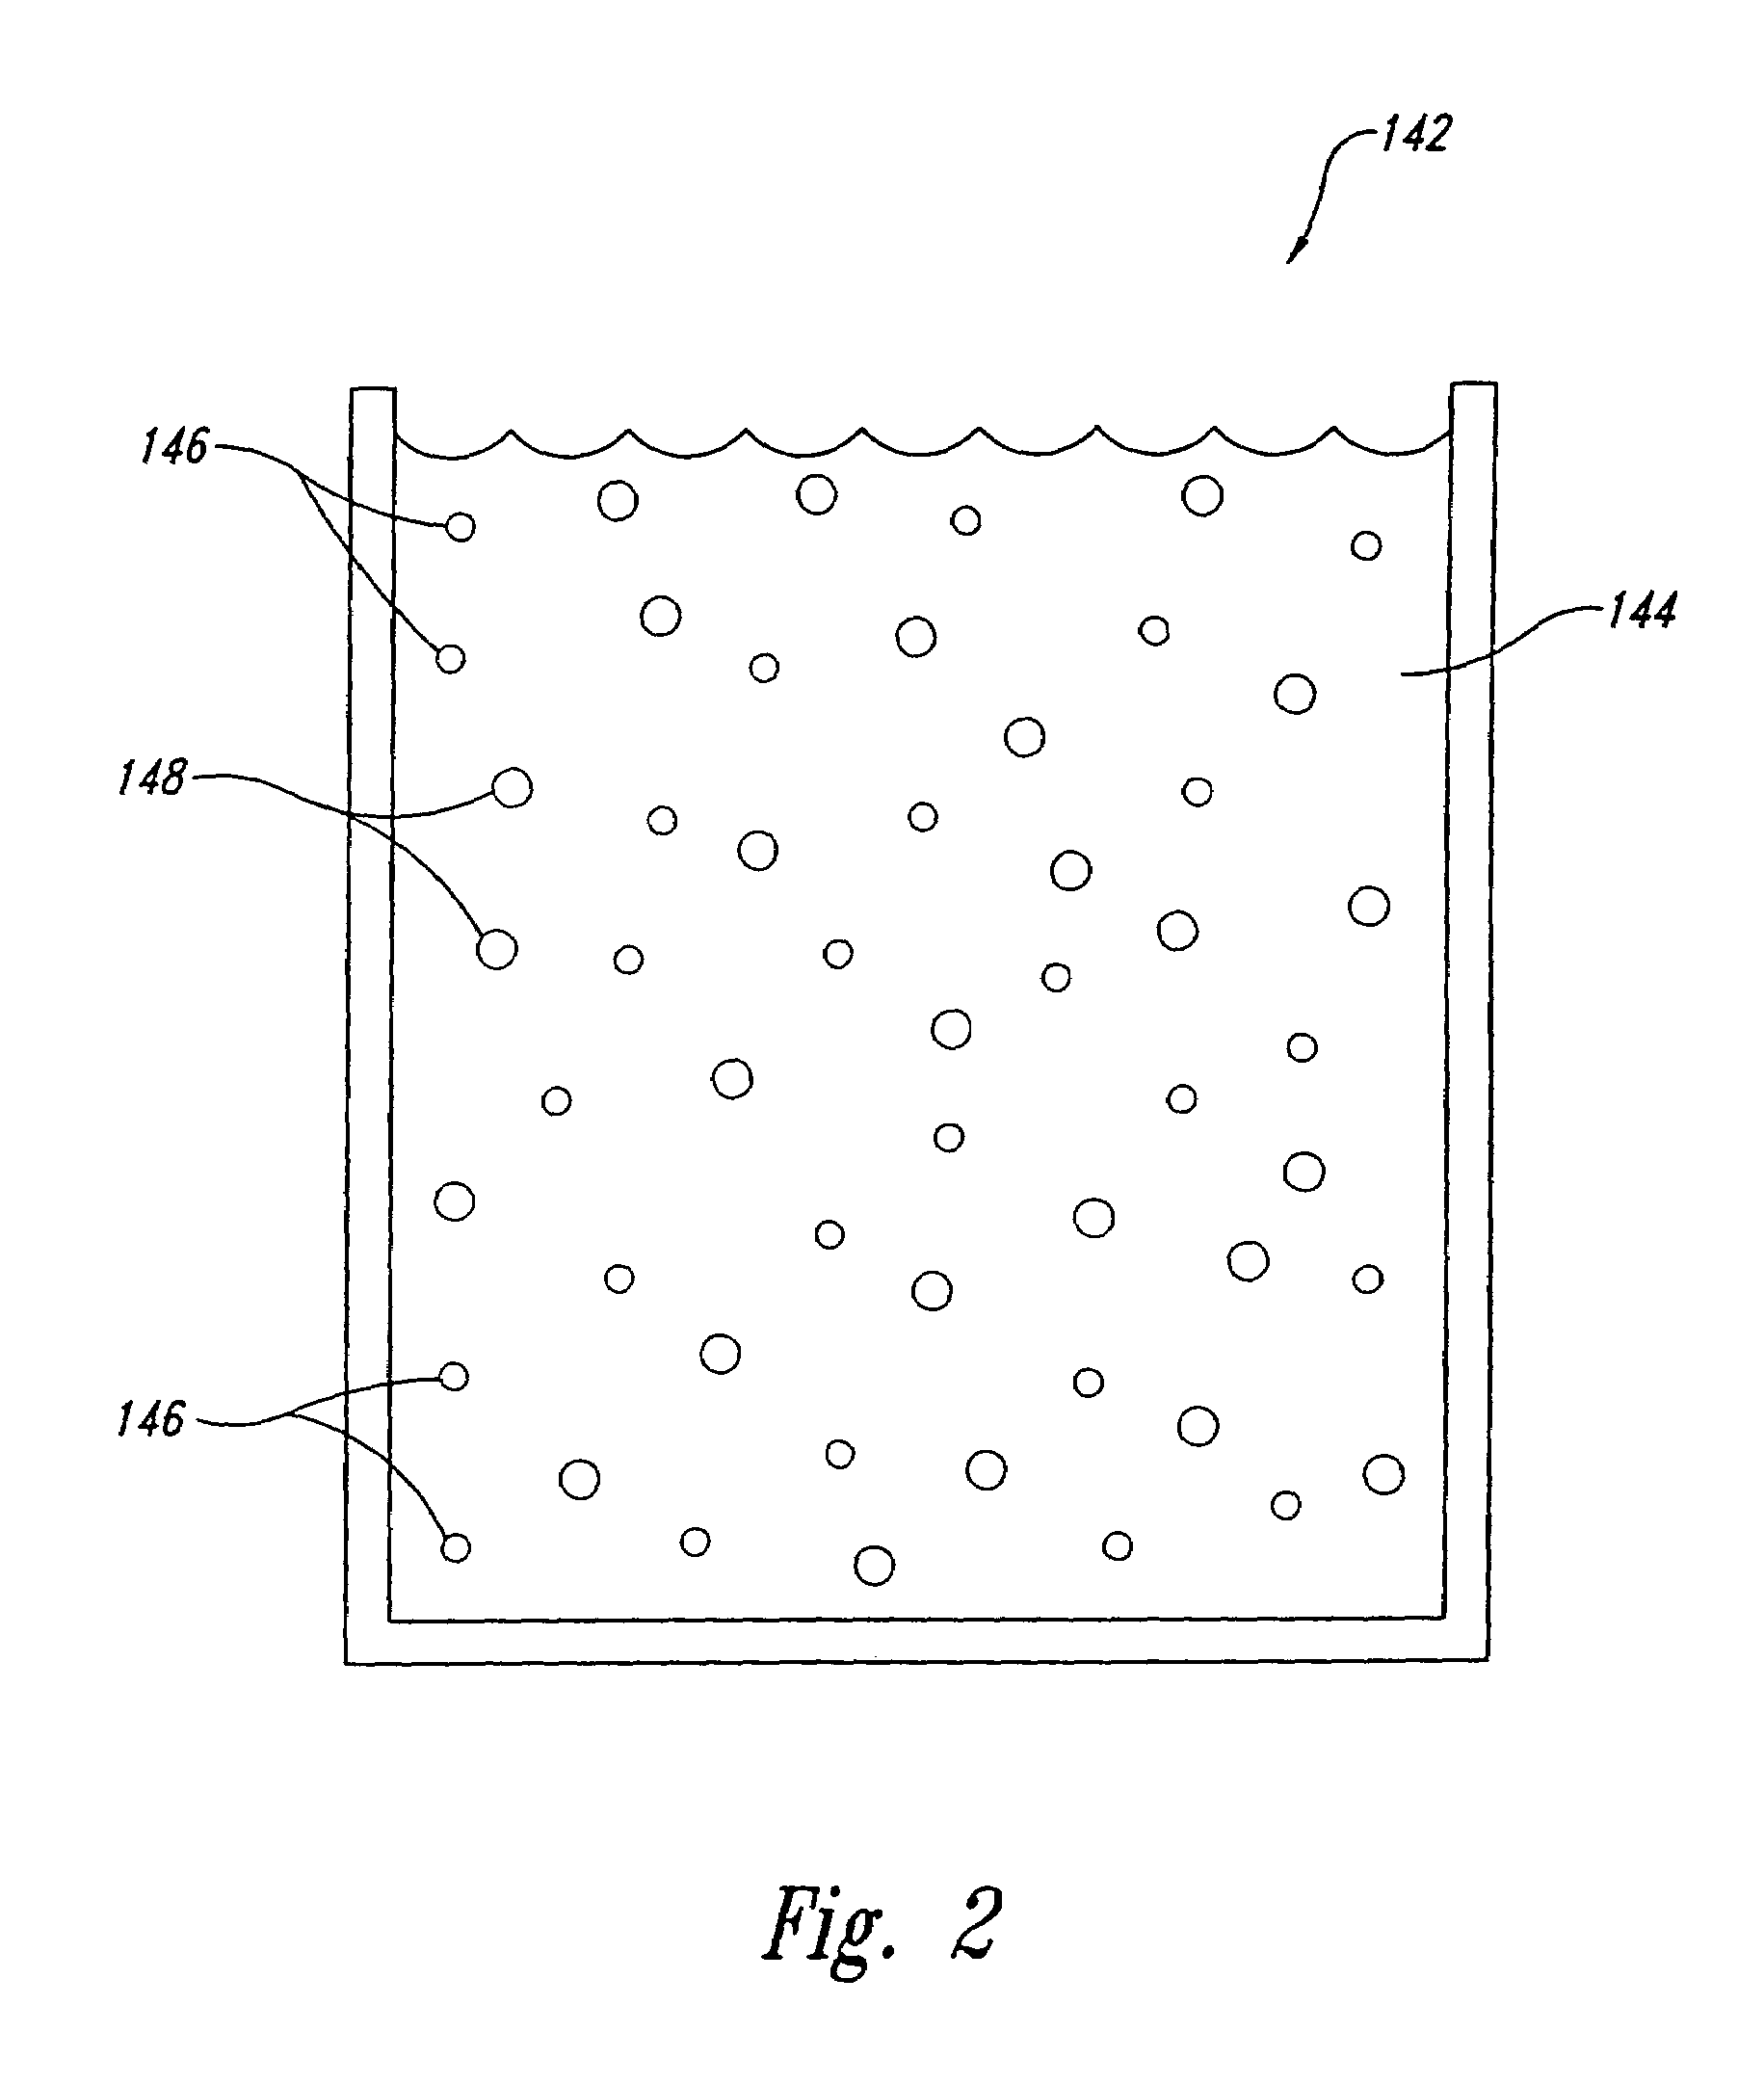 Planarizing solutions, planarizing machines and methods for mechanical or chemical-mechanical planarization of microelectronic-device substrate assemblies